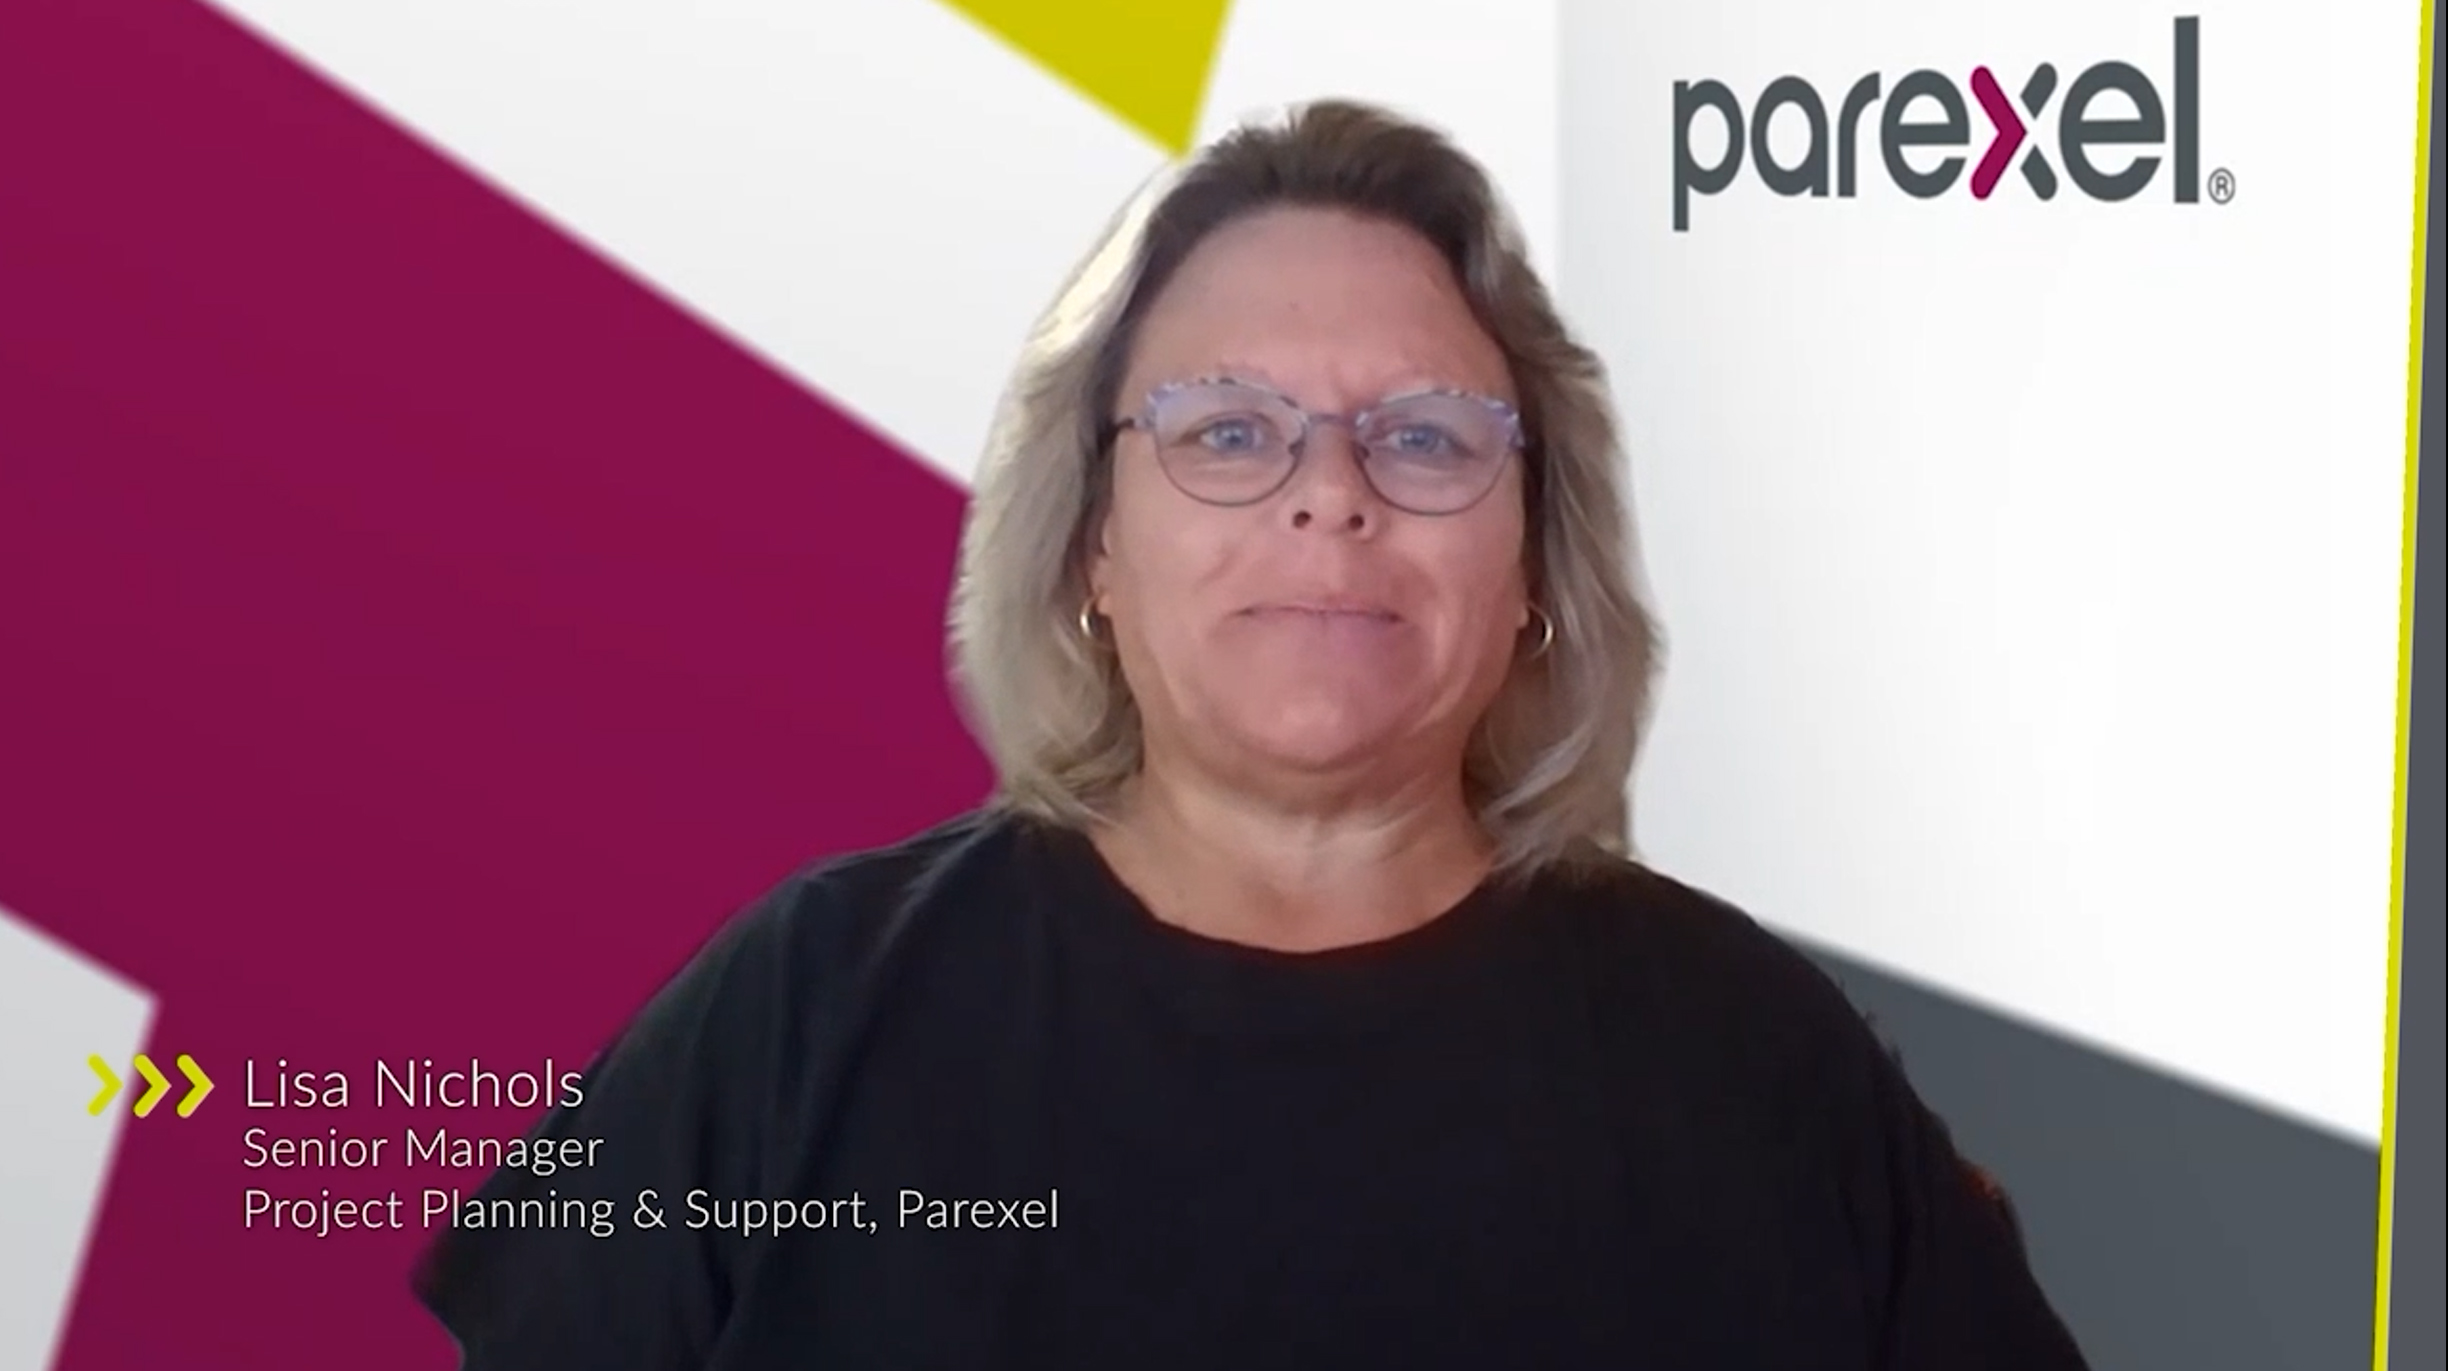 Screenshot of one of the speakers, Lisa, a female white American and Senior Manager, Project Planning & Support at Parexel, is has shoulder long blond hair and wears a black t-shirt.